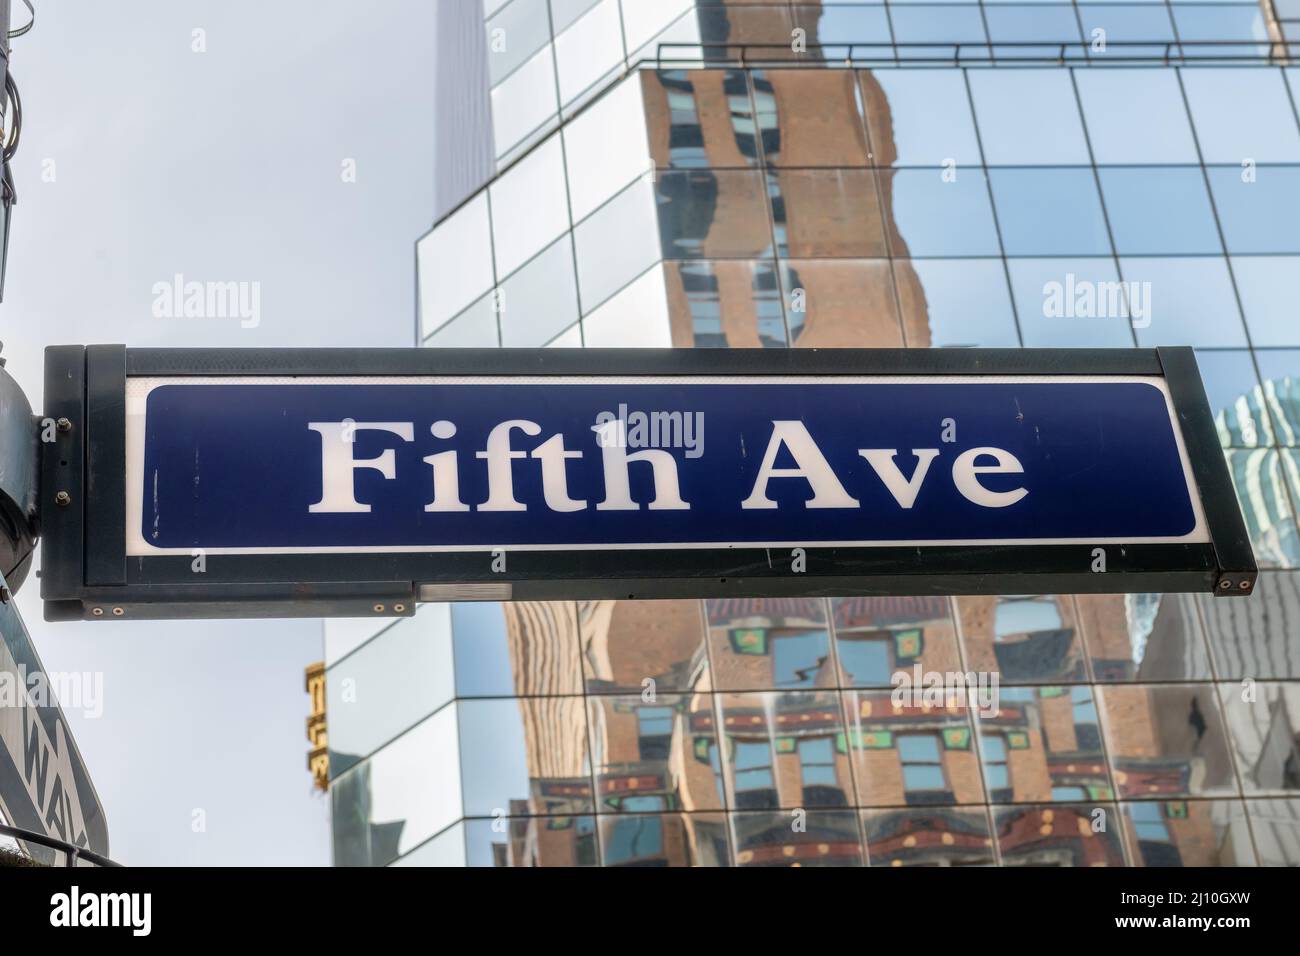 Fifth Avenue (5th Ave) Sign, New York City Stock Photo